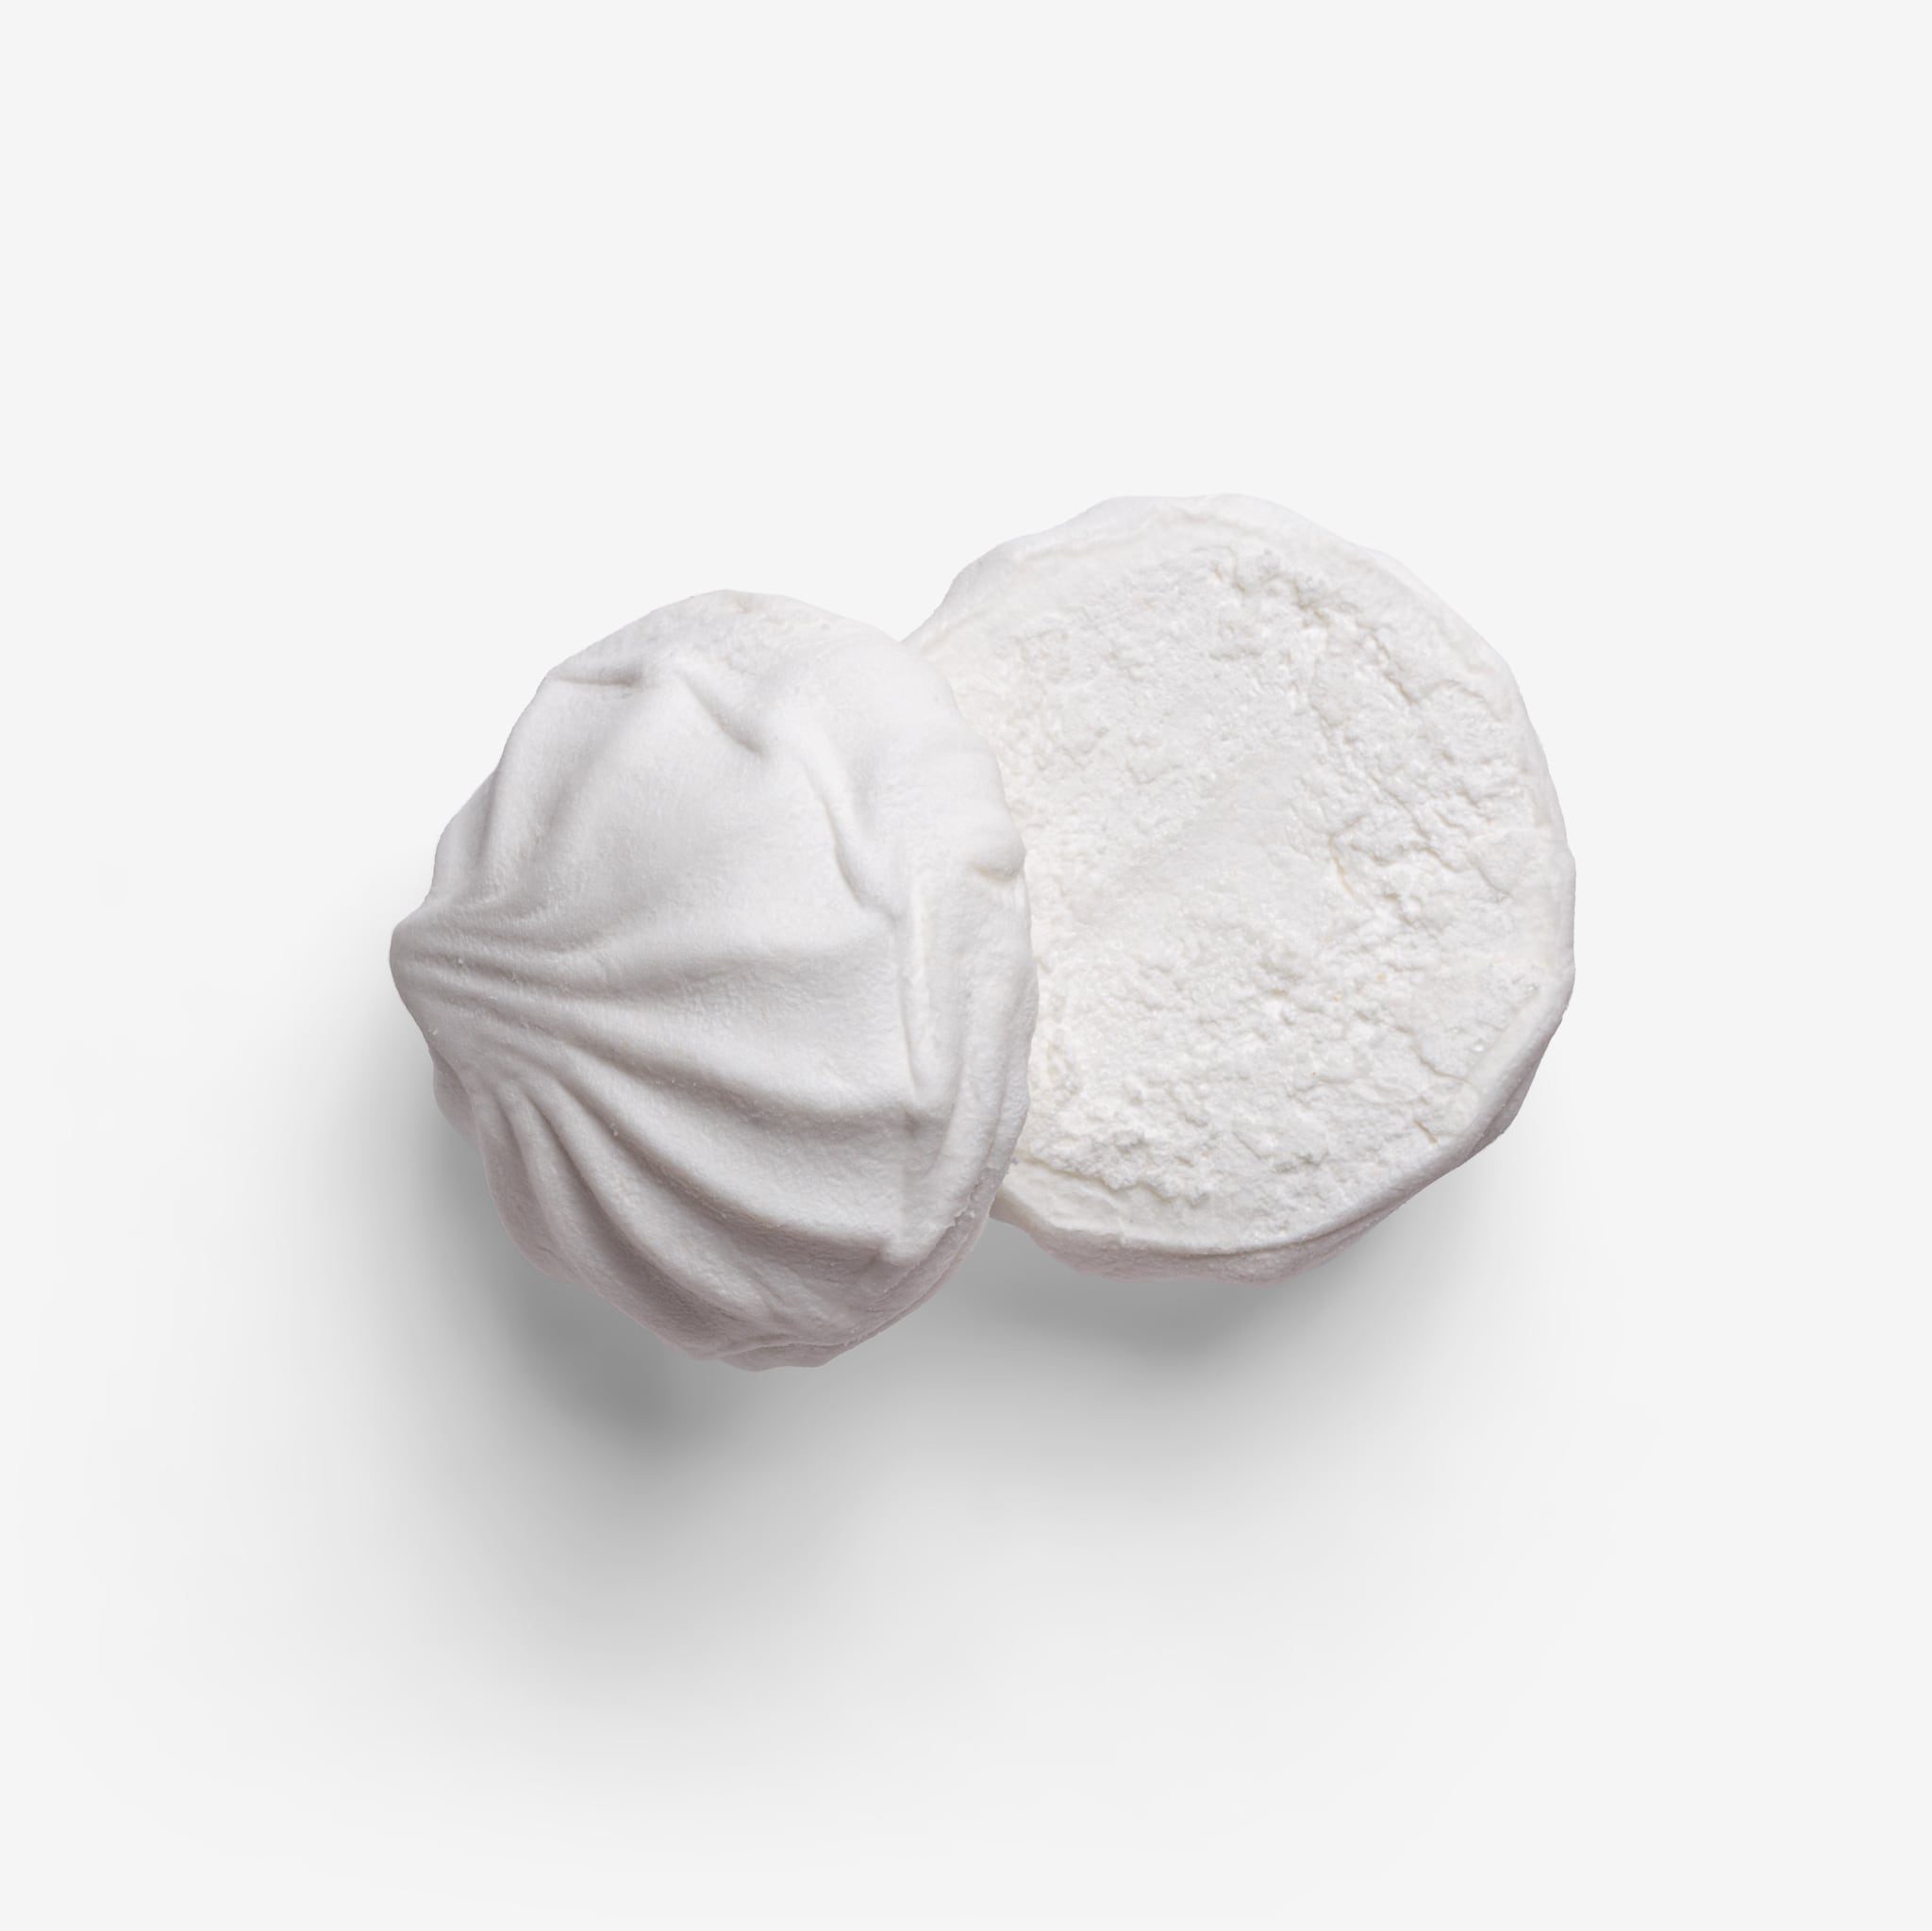 Marshmallow PSD isolated image